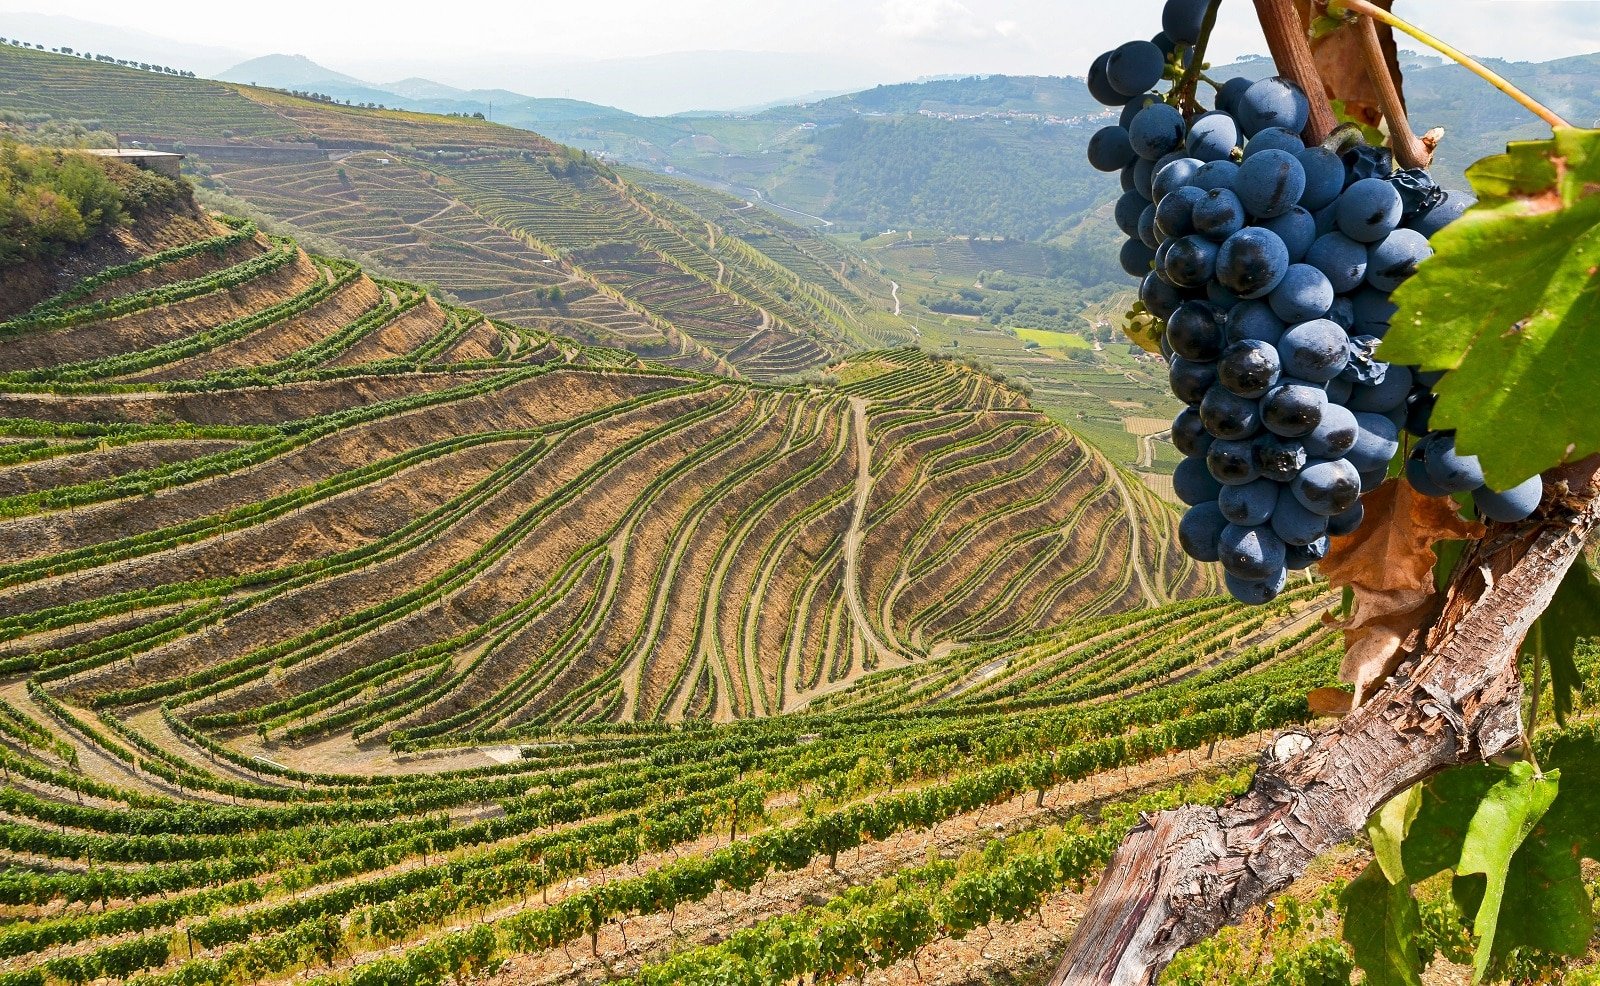 <p><span>Douro Valley is renowned for its exquisite Port wine; you’ll step into one of the oldest demarcated wine regions in the world. This region is not just about the wine; it’s a visual masterpiece. As you explore, you’ll be captivated by the dramatic terraced vineyards that sweep along the banks of the Douro River. </span><span>This stunning arrangement of vineyards creates a unique and spectacular landscape, so much so that the area has been designated a UNESCO World Heritage site.</span></p> <p><span>The beauty of the Douro Valley lies in its harmonious blend of natural scenery and centuries-old winemaking tradition. Here, you can indulge in the rich, fortified wines while soaking in the breathtaking views that have shaped the region’s history and contributed to its esteemed reputation in the wine world.</span></p> <p><b>Insider’s Tip: </b><span>Take a river cruise for stunning views of the terraced vineyards.</span></p> <p><b>When To Travel: </b><span>September to October for the grape harvest.</span></p> <p><b>How To Get There: </b><span>Fly into Porto and drive or take a train to the Douro Valley.</span></p>